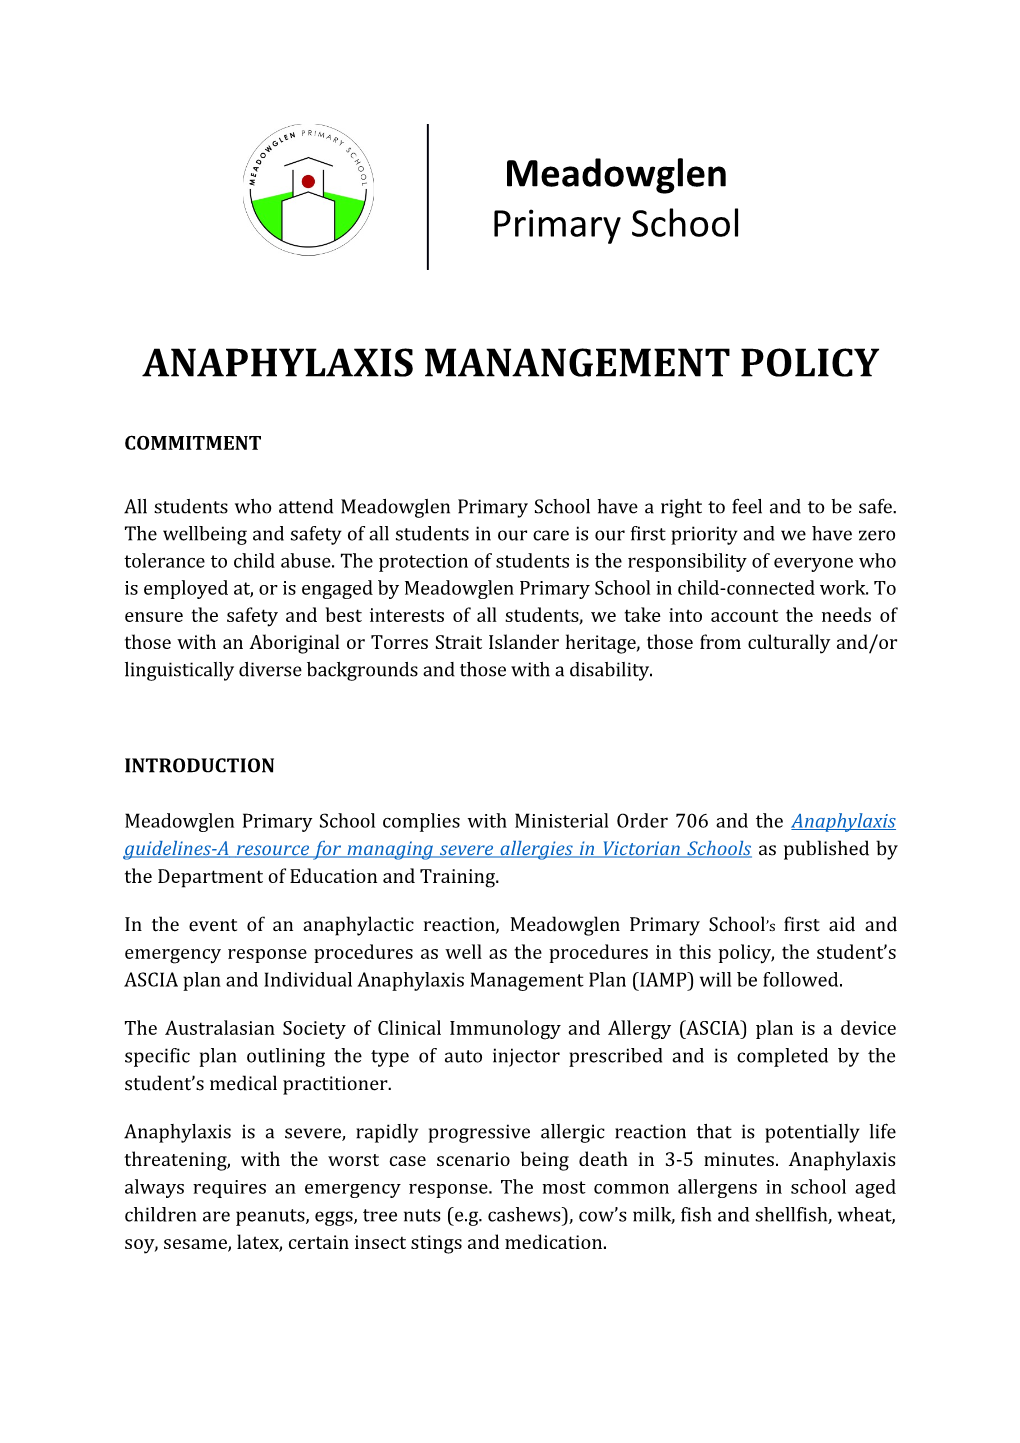 Anaphylaxis Manangement Policy